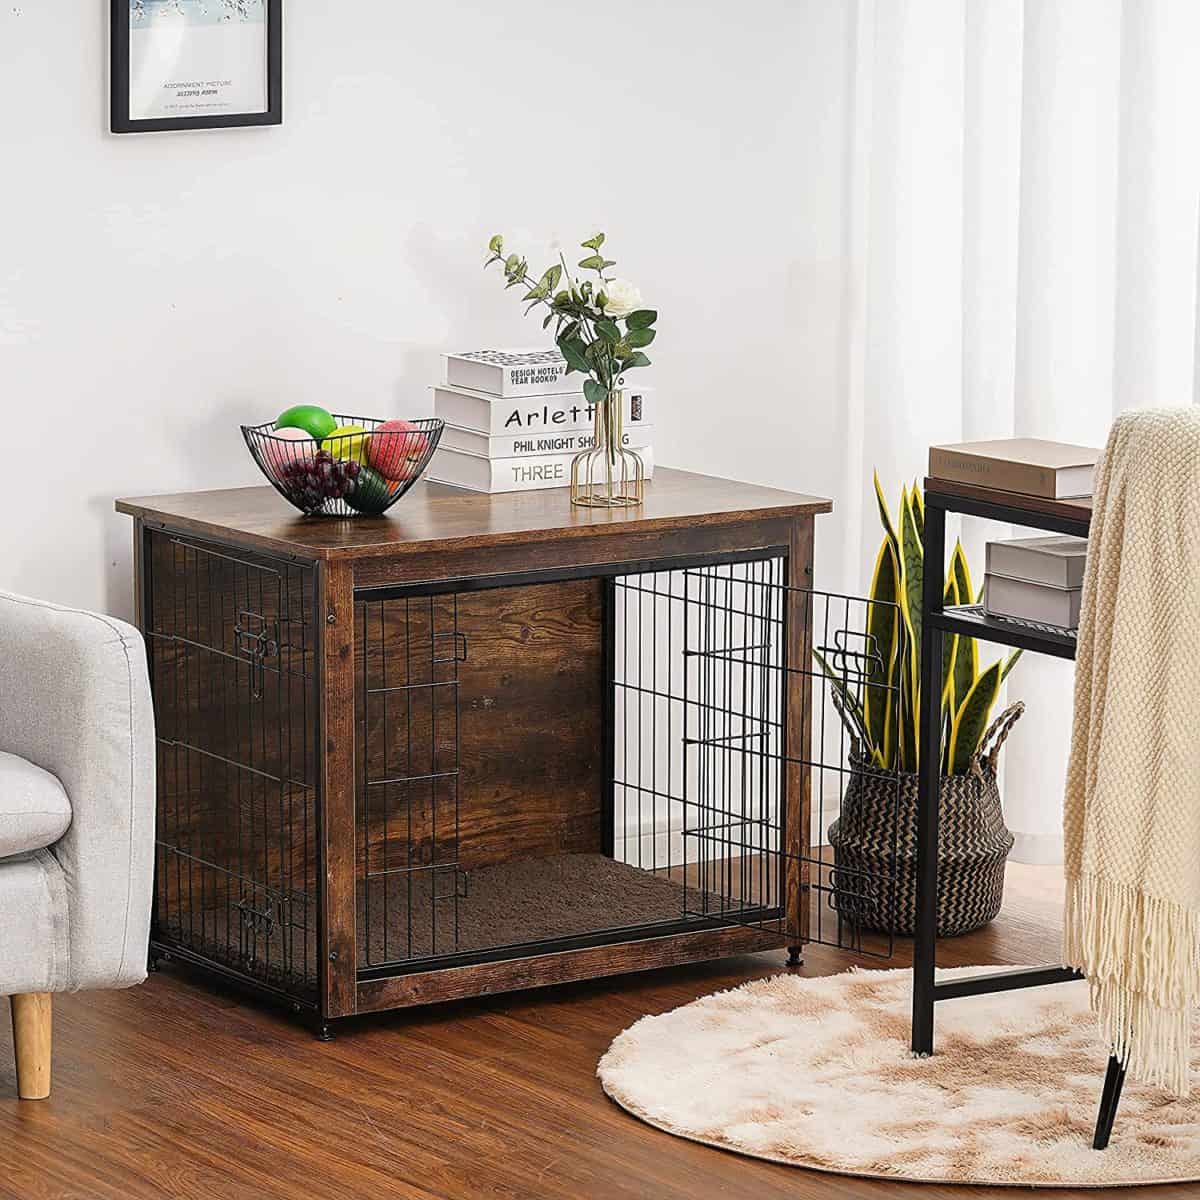 DWANTON Dog Crate Table Furniture